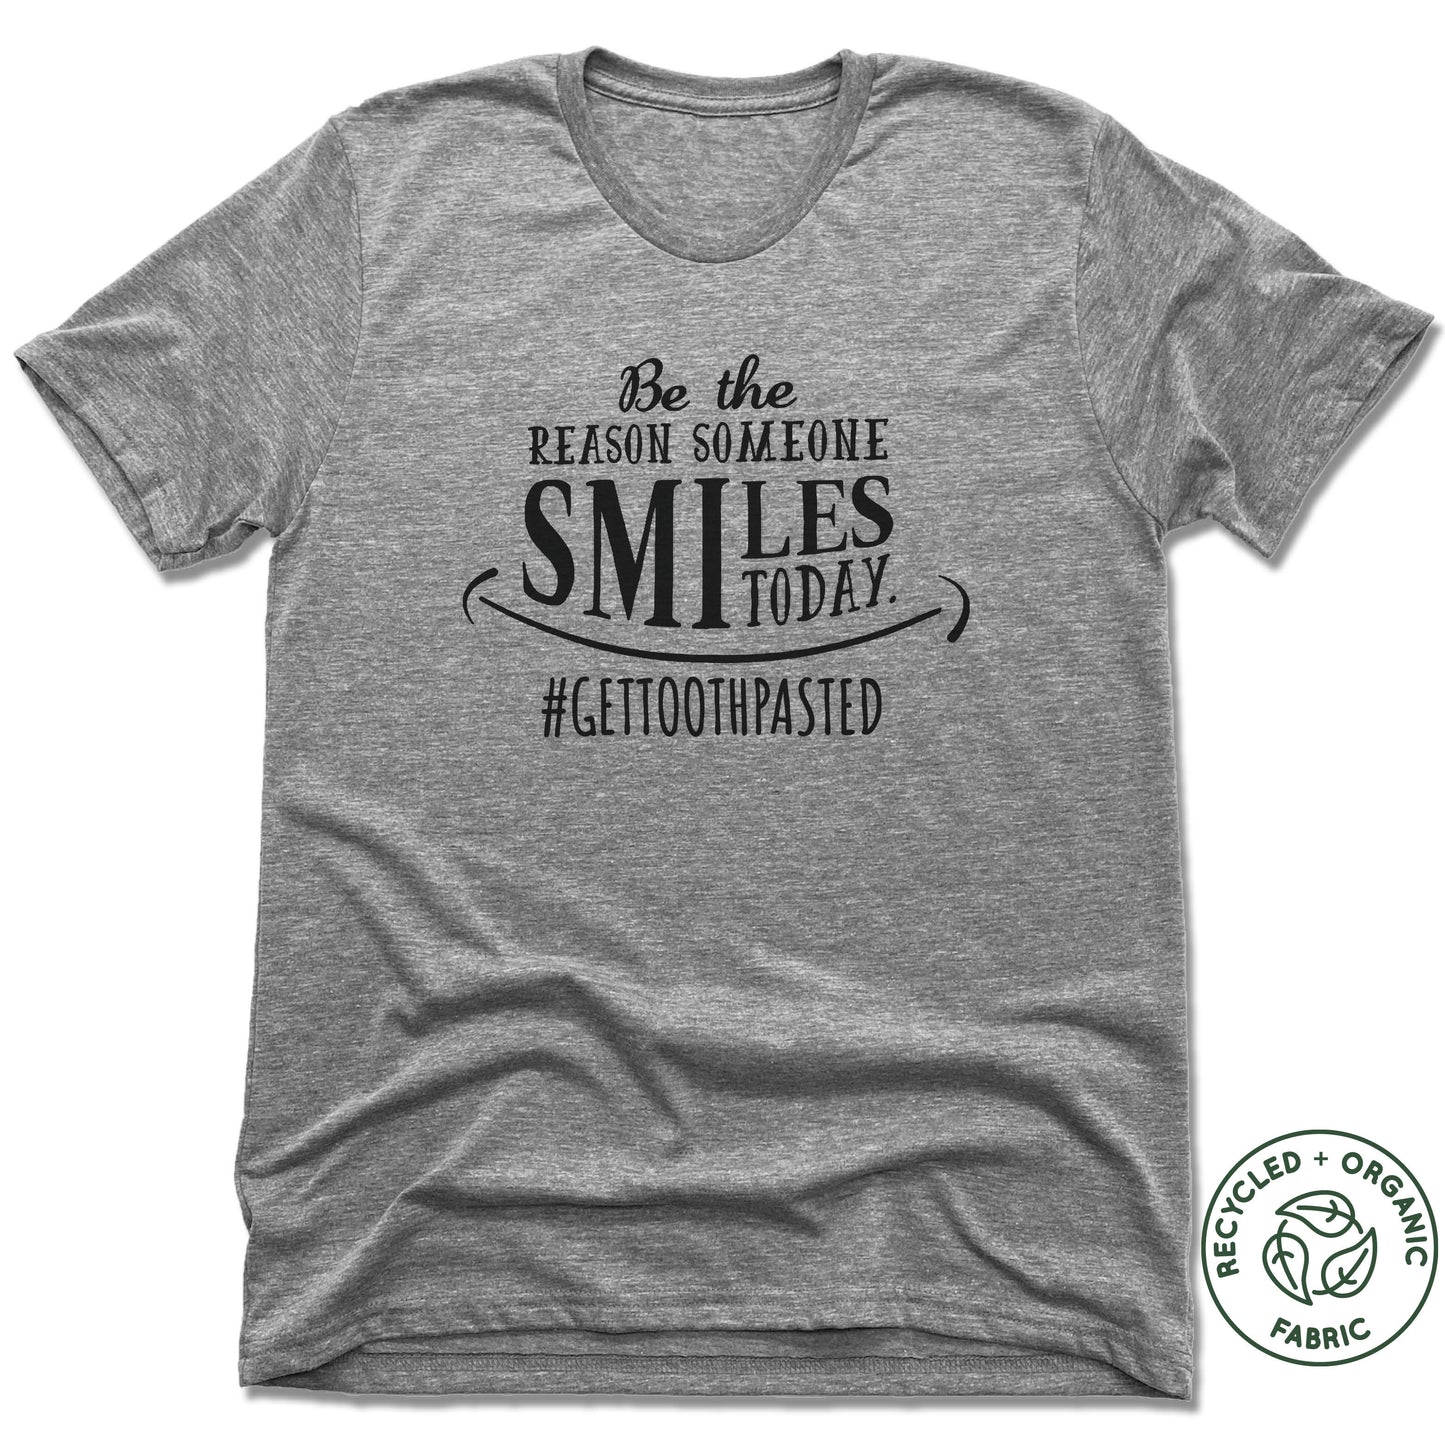 THE SISTER'S CLOSET | UNISEX GRAY Recycled Tri-Blend